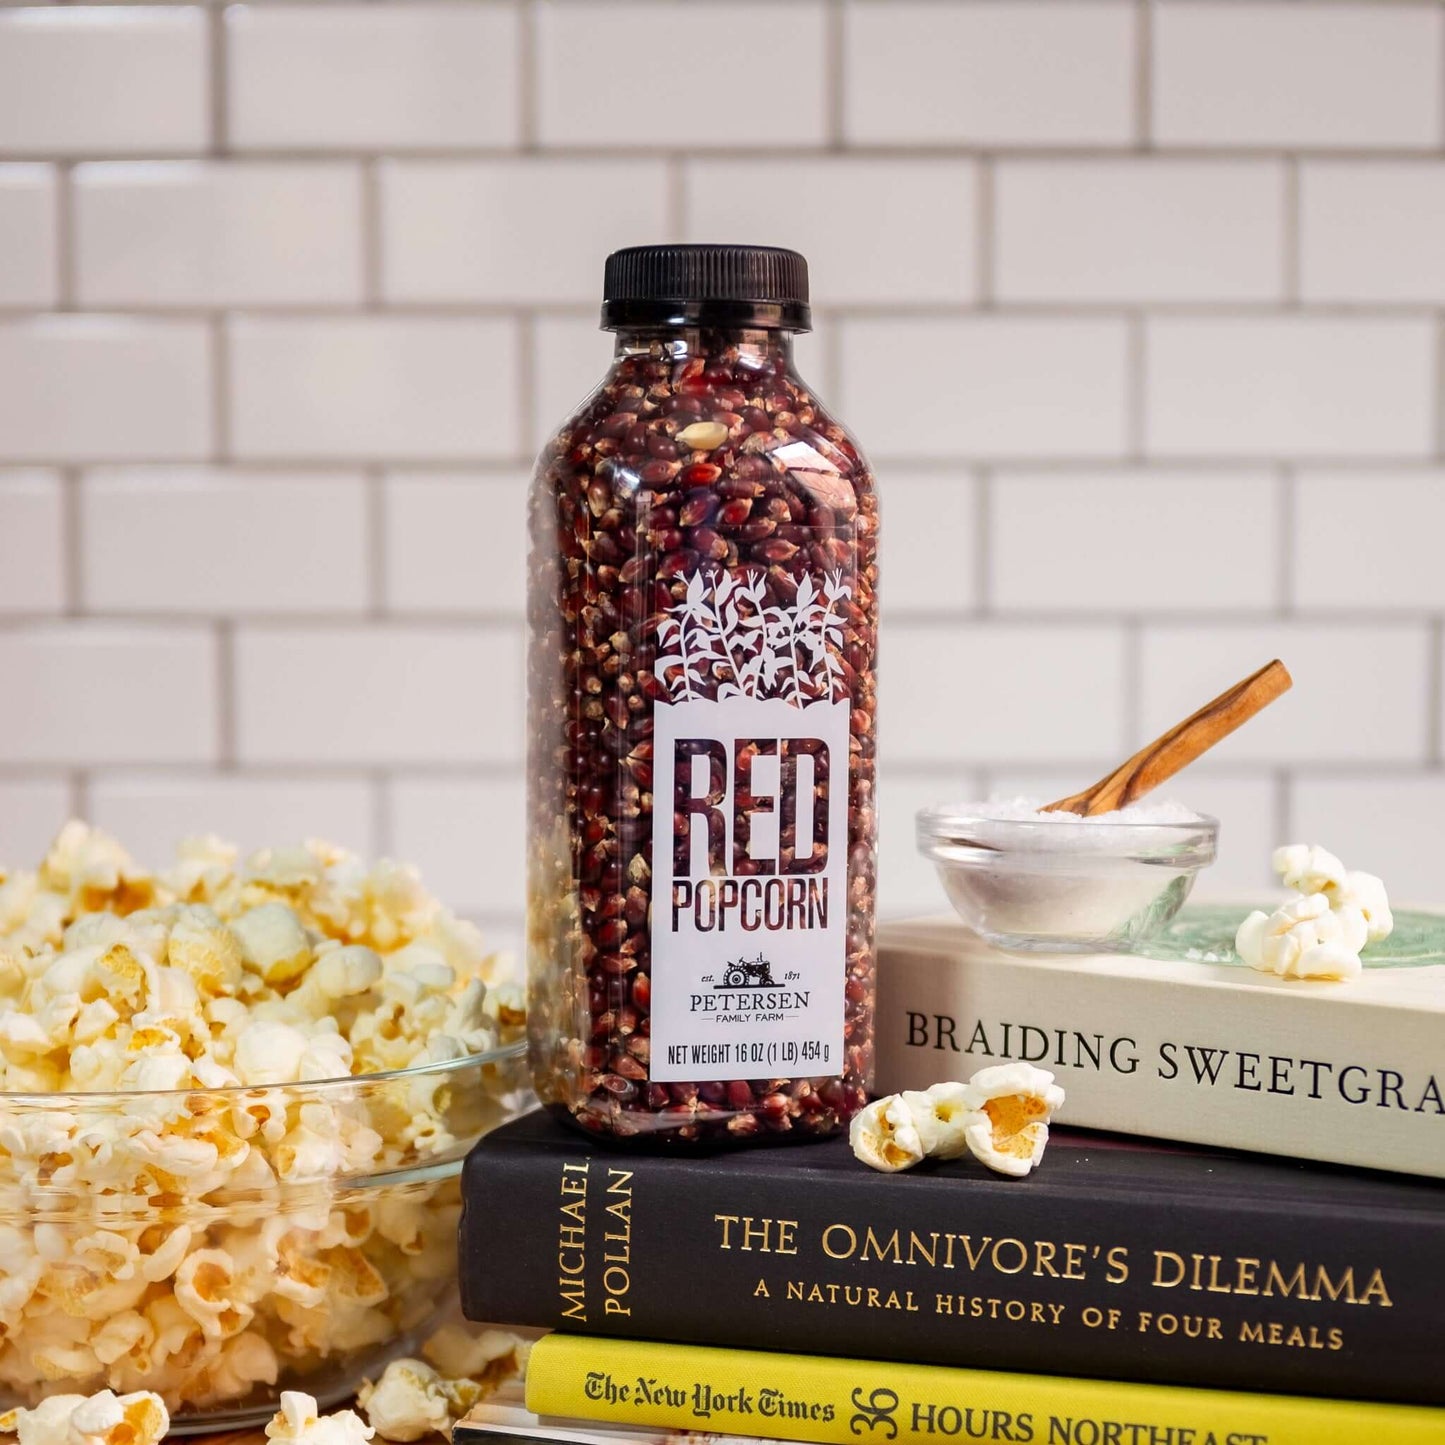 Red popcorn kernels by Petersen Family Farm. 16oz Plastic bottle on counter with popcorn